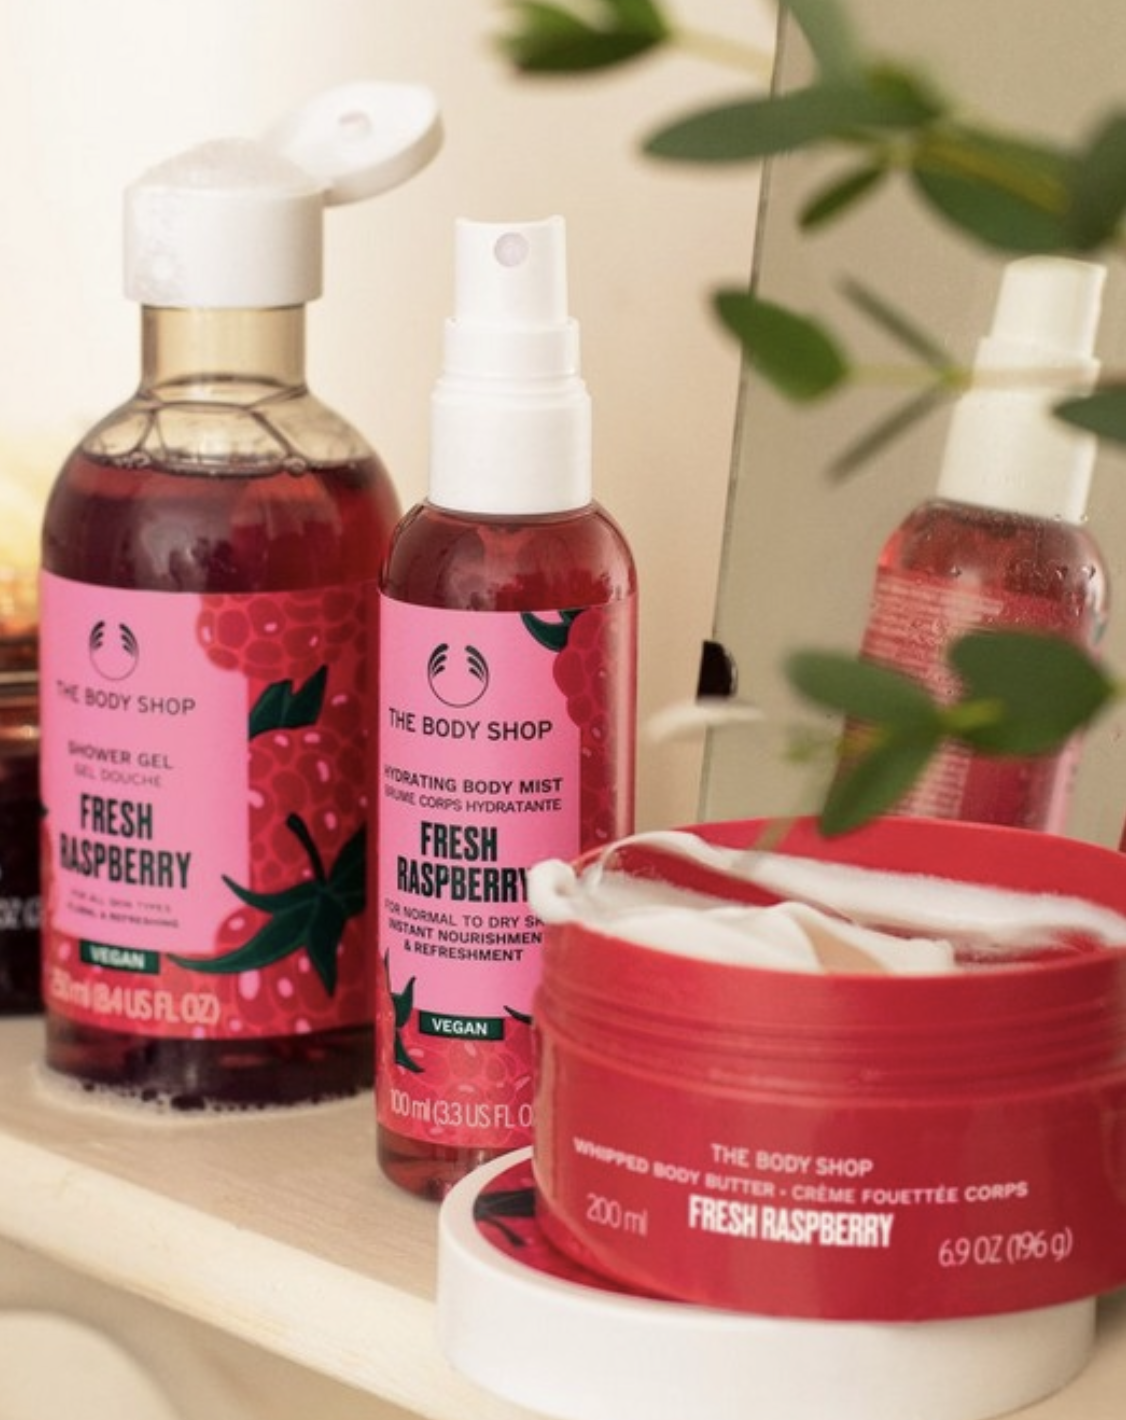 The Body Shop: Up to 60% off sale items